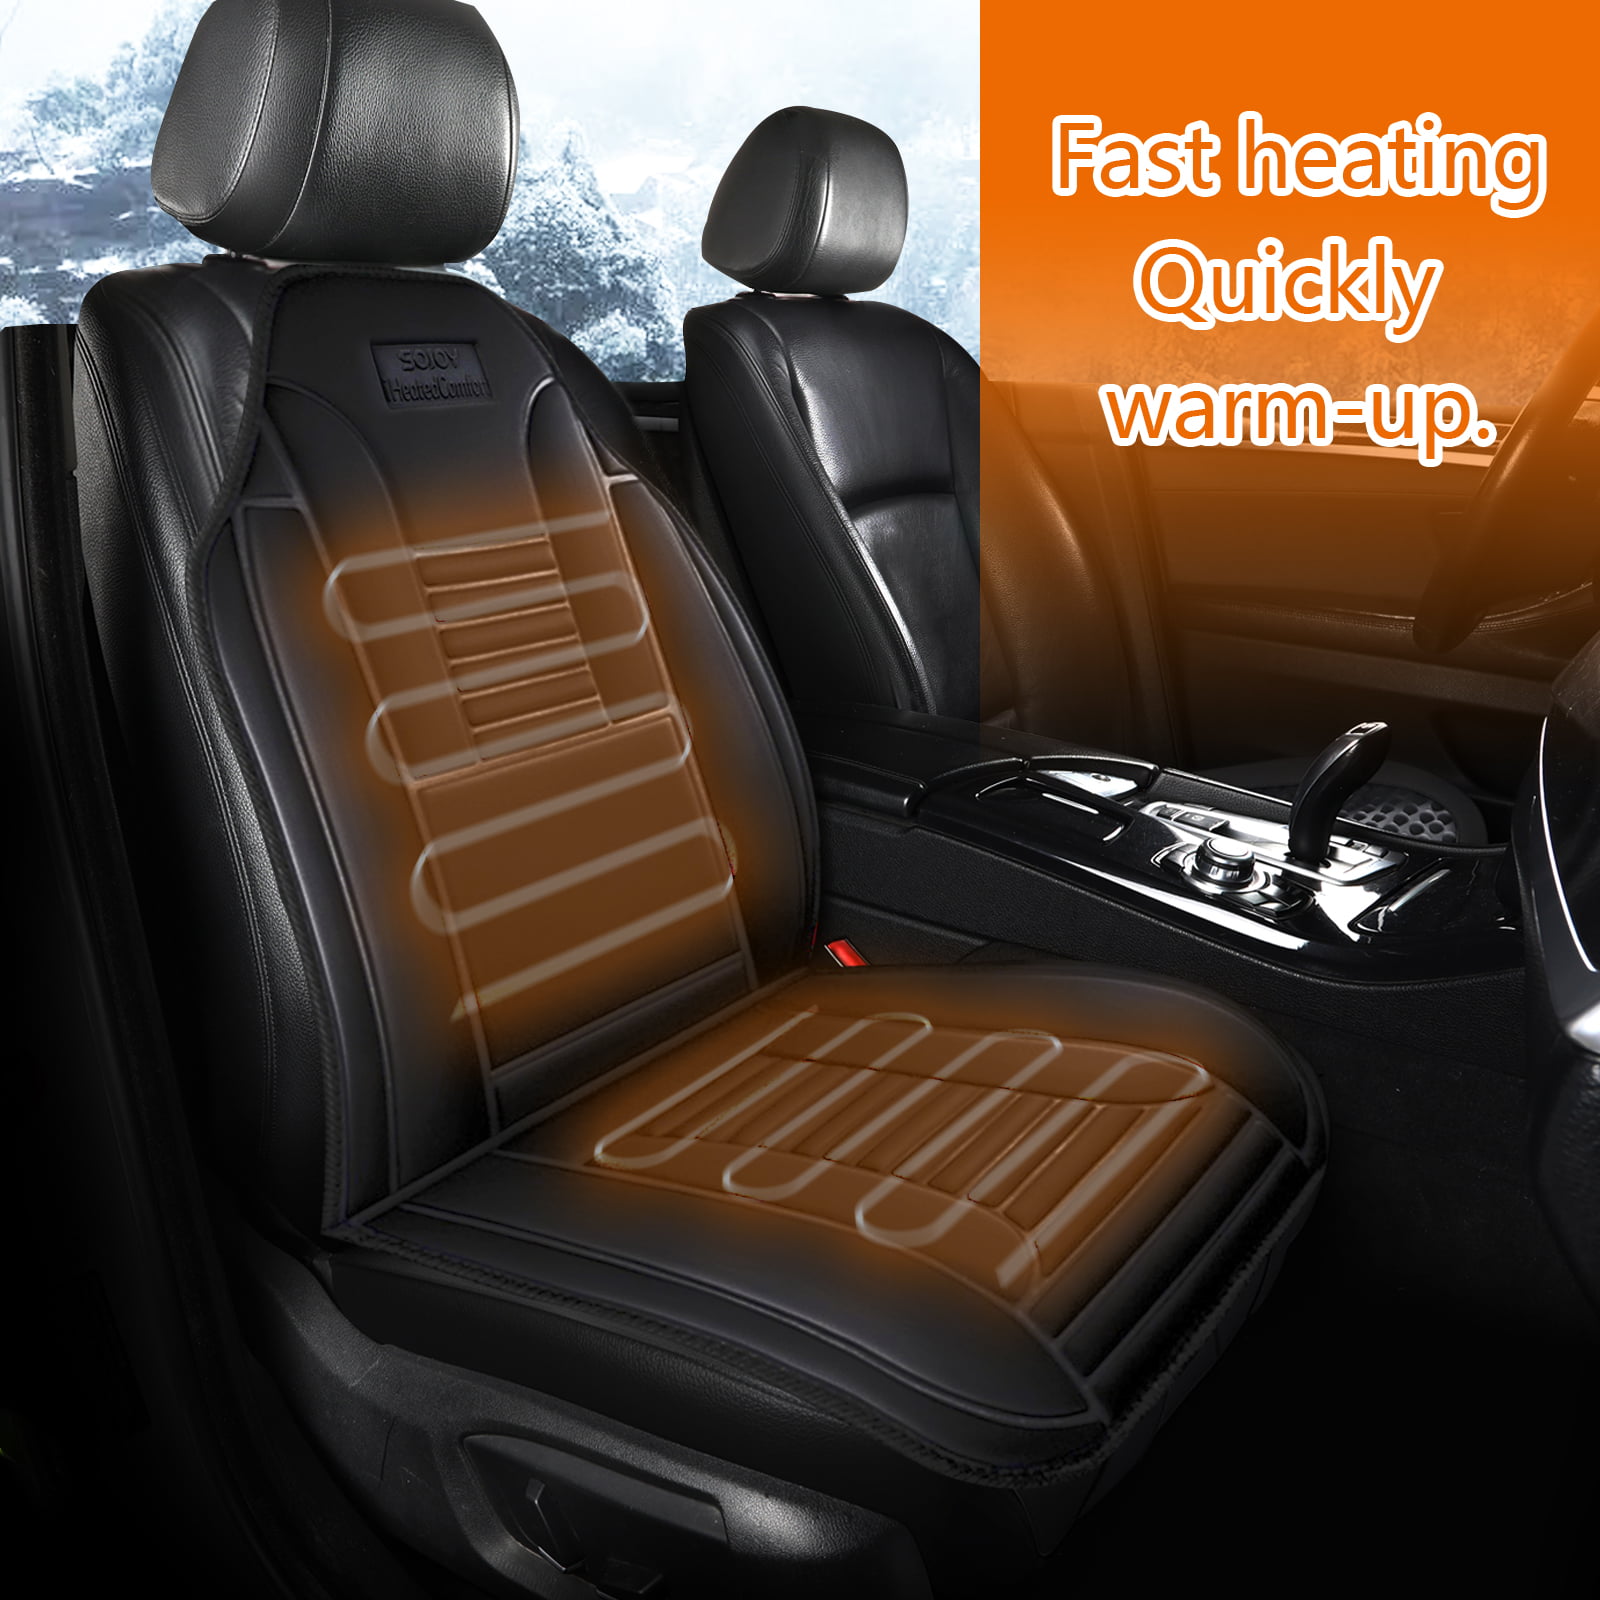 12V Heated Car Seat Cushion Warmer Made with Super Soft Velour,  High/Med/Low, 45 Mins Auto Shut-Off And Thermostat to Protect Over Heating  Sojoy